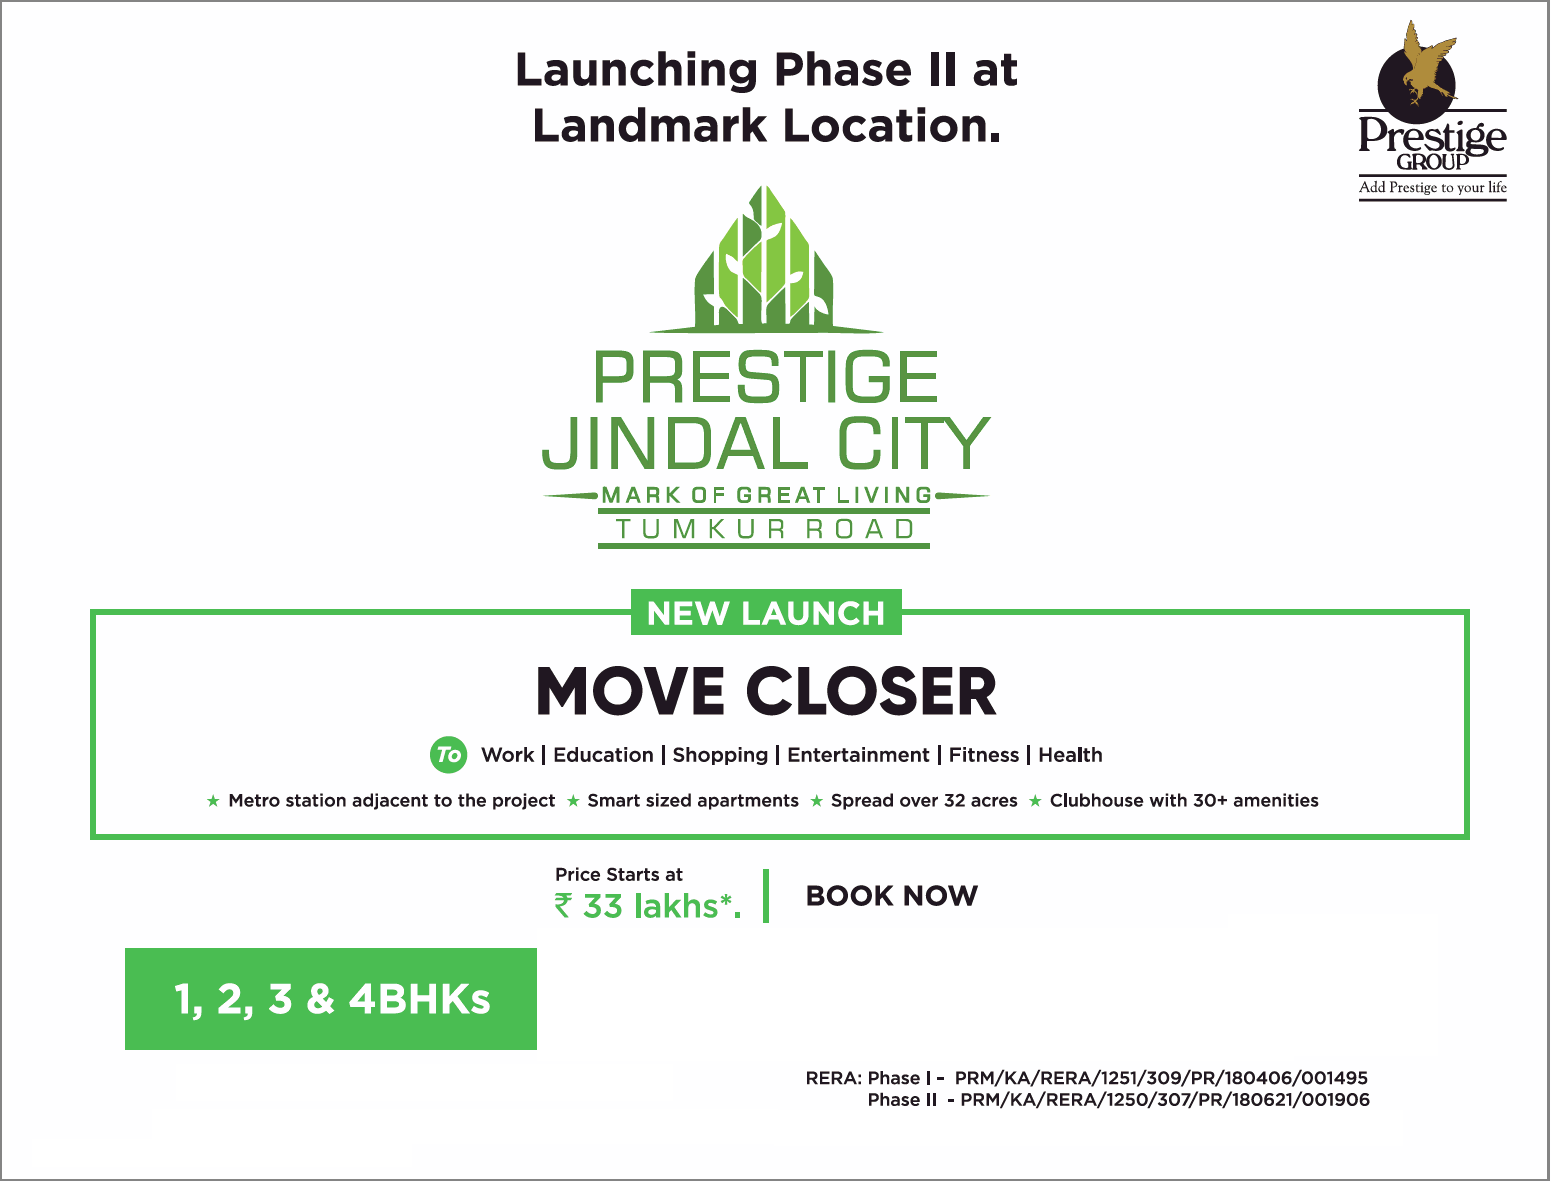 Prestige Jindal City launching 1, 2, 3 & 4 bhk at Rs. 33 lakhs in Bangalore Update